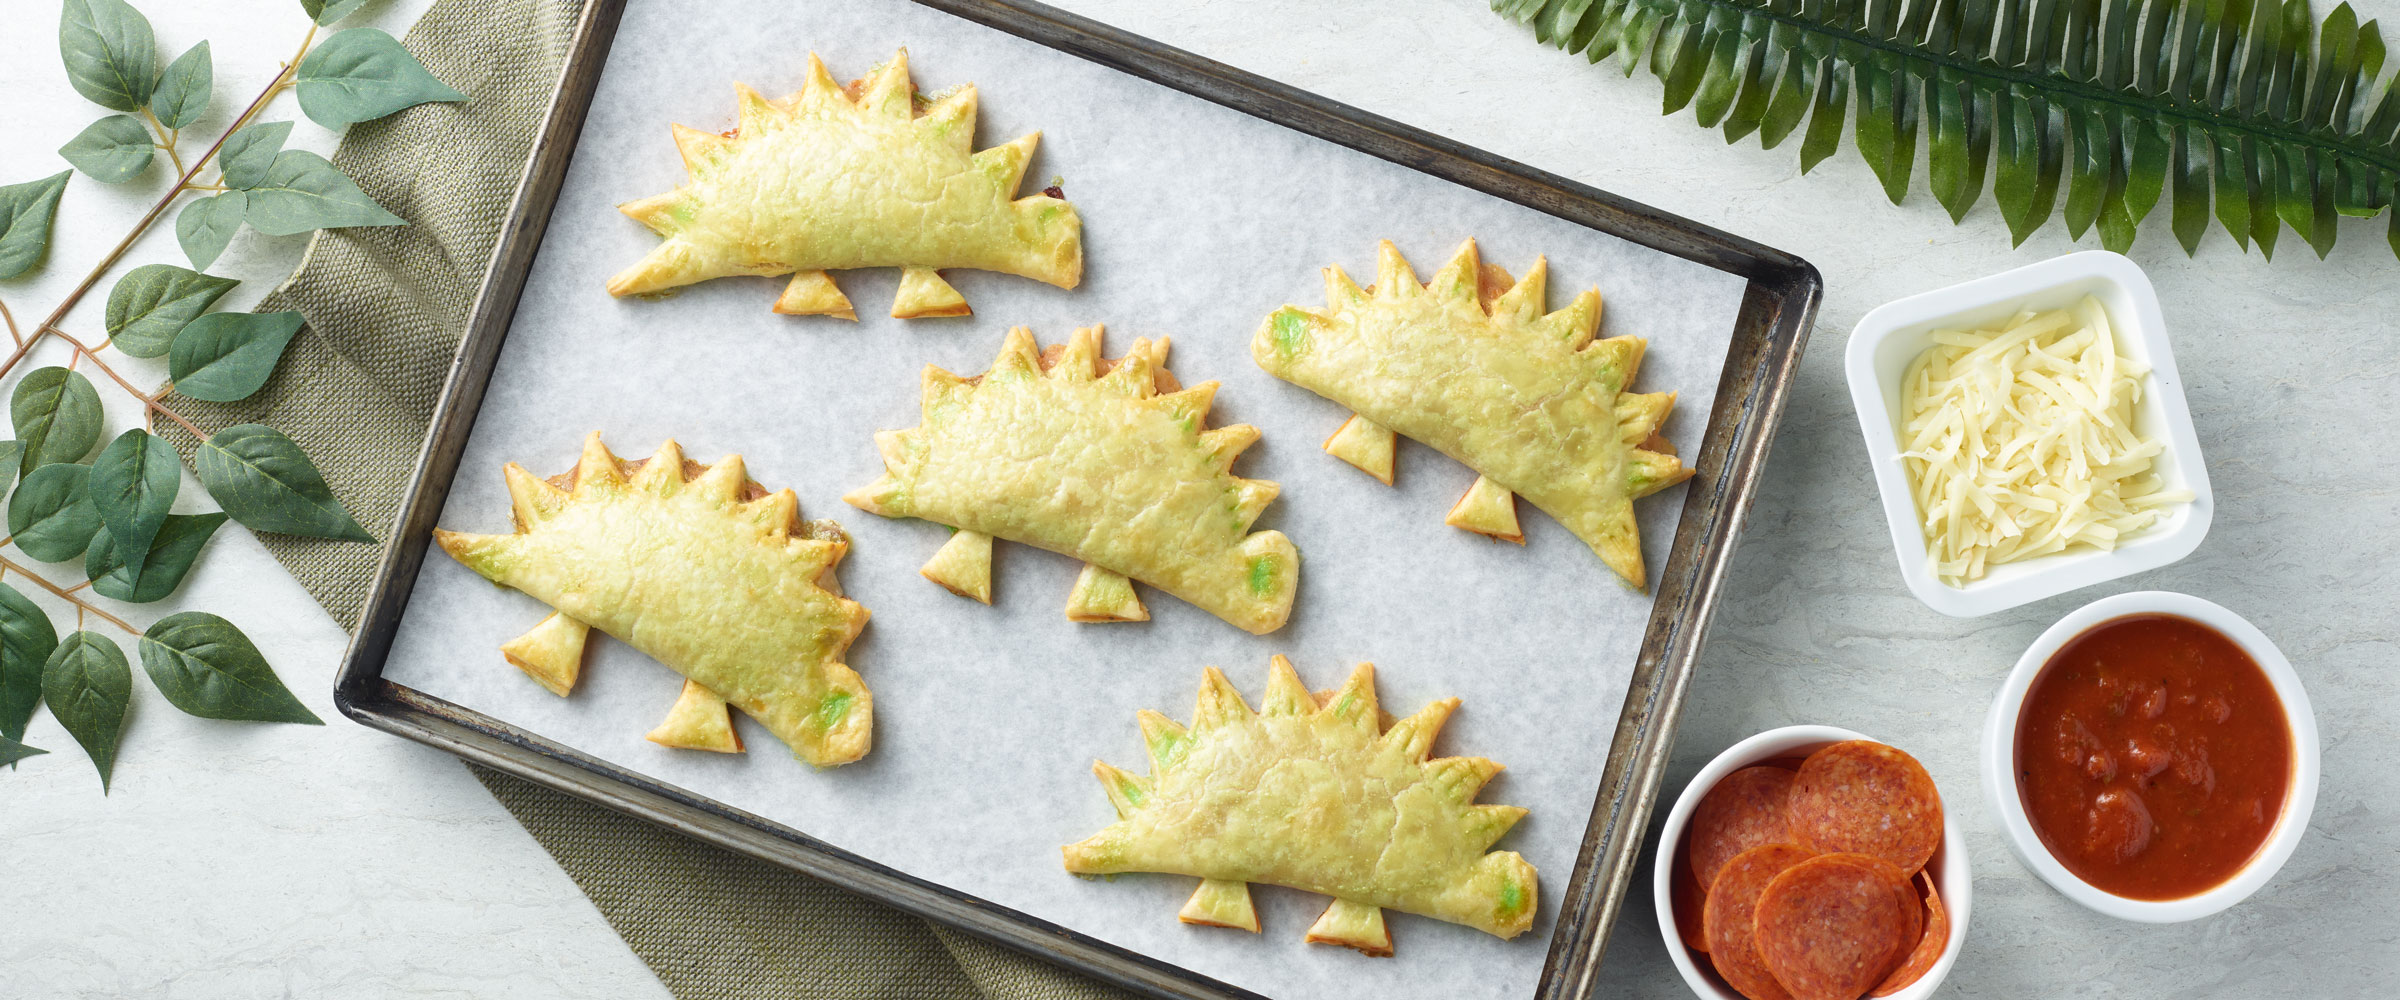 Pepperoni Dinosaur shaped Turnovers on sheet pan with toppings on side